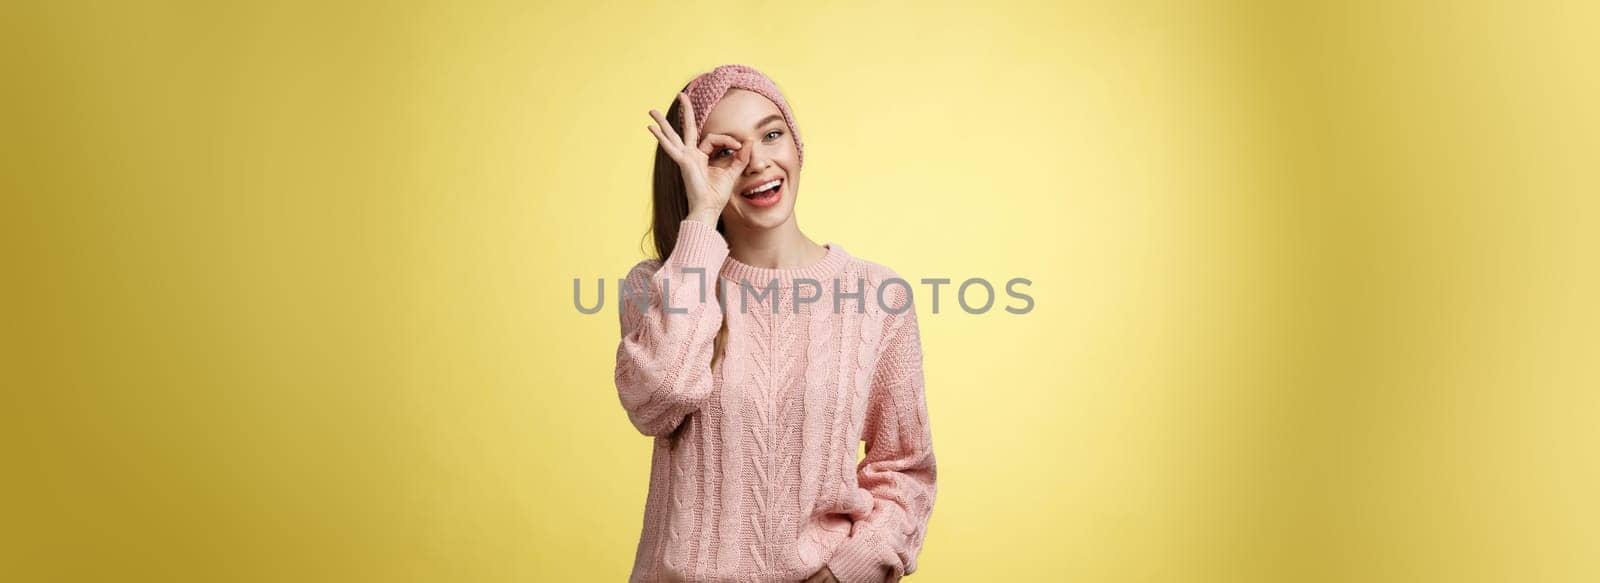 Cheerful girl saying ok. Attractive stylish shoolgirl in knitted sweater relaxed feeling upbeat, sharing happiness and joy, showing okay sign on eye smiling optimistic, entertained over yellow wall.